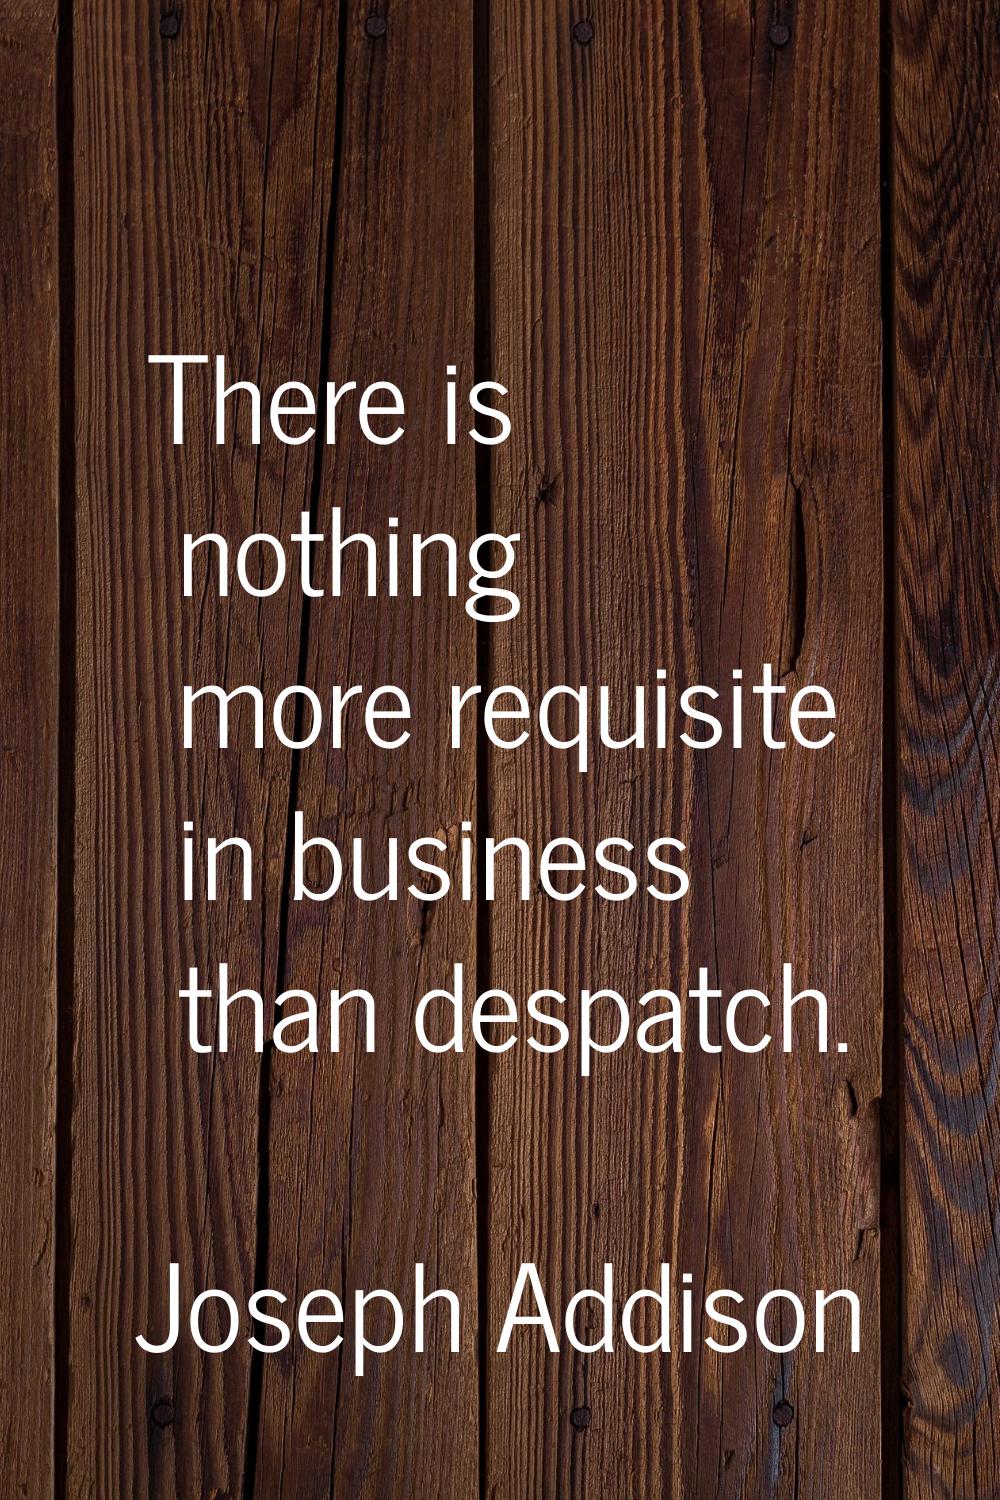 There is nothing more requisite in business than despatch.